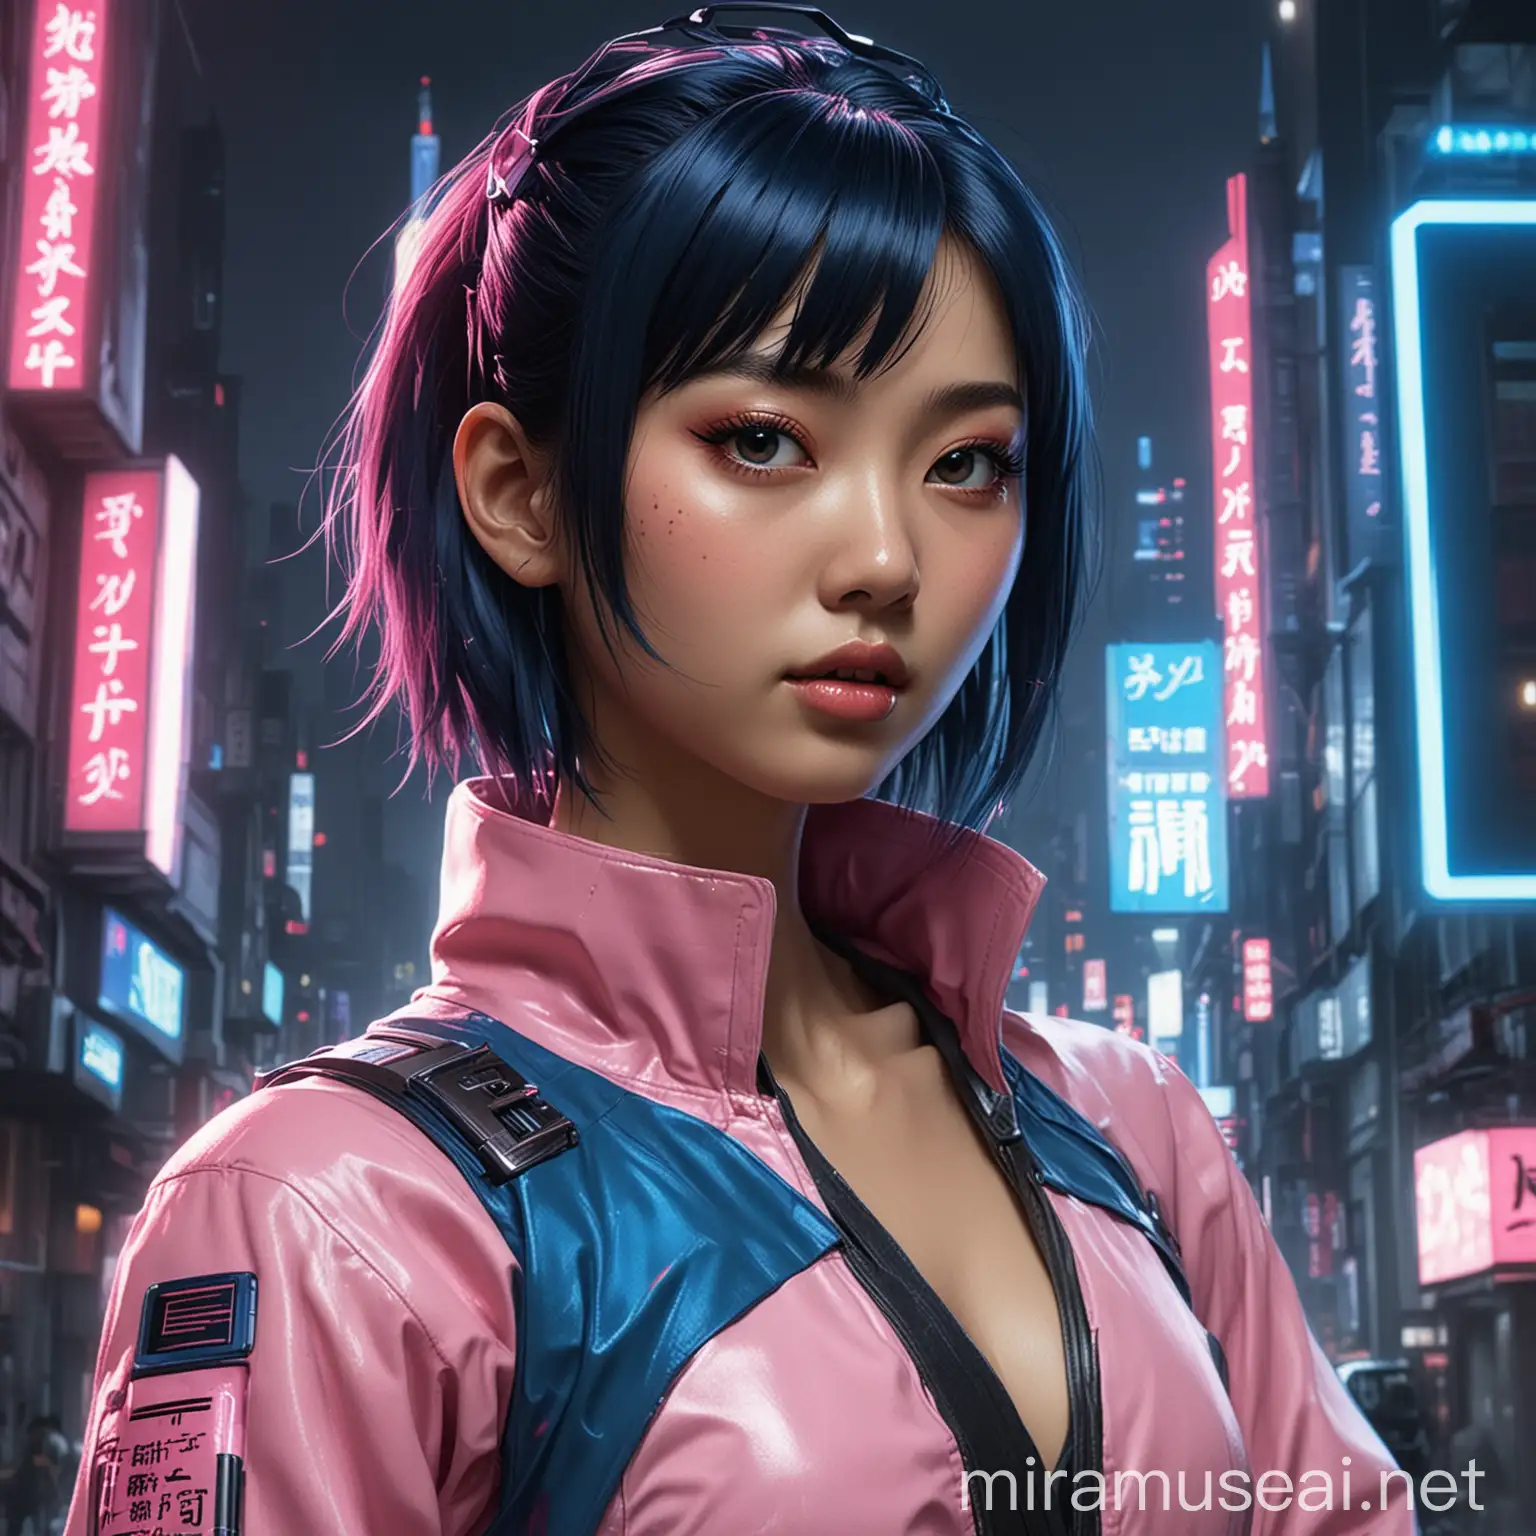 Futuristic Neo Tokyo Asian Woman Profile Picture in Blue and Pink